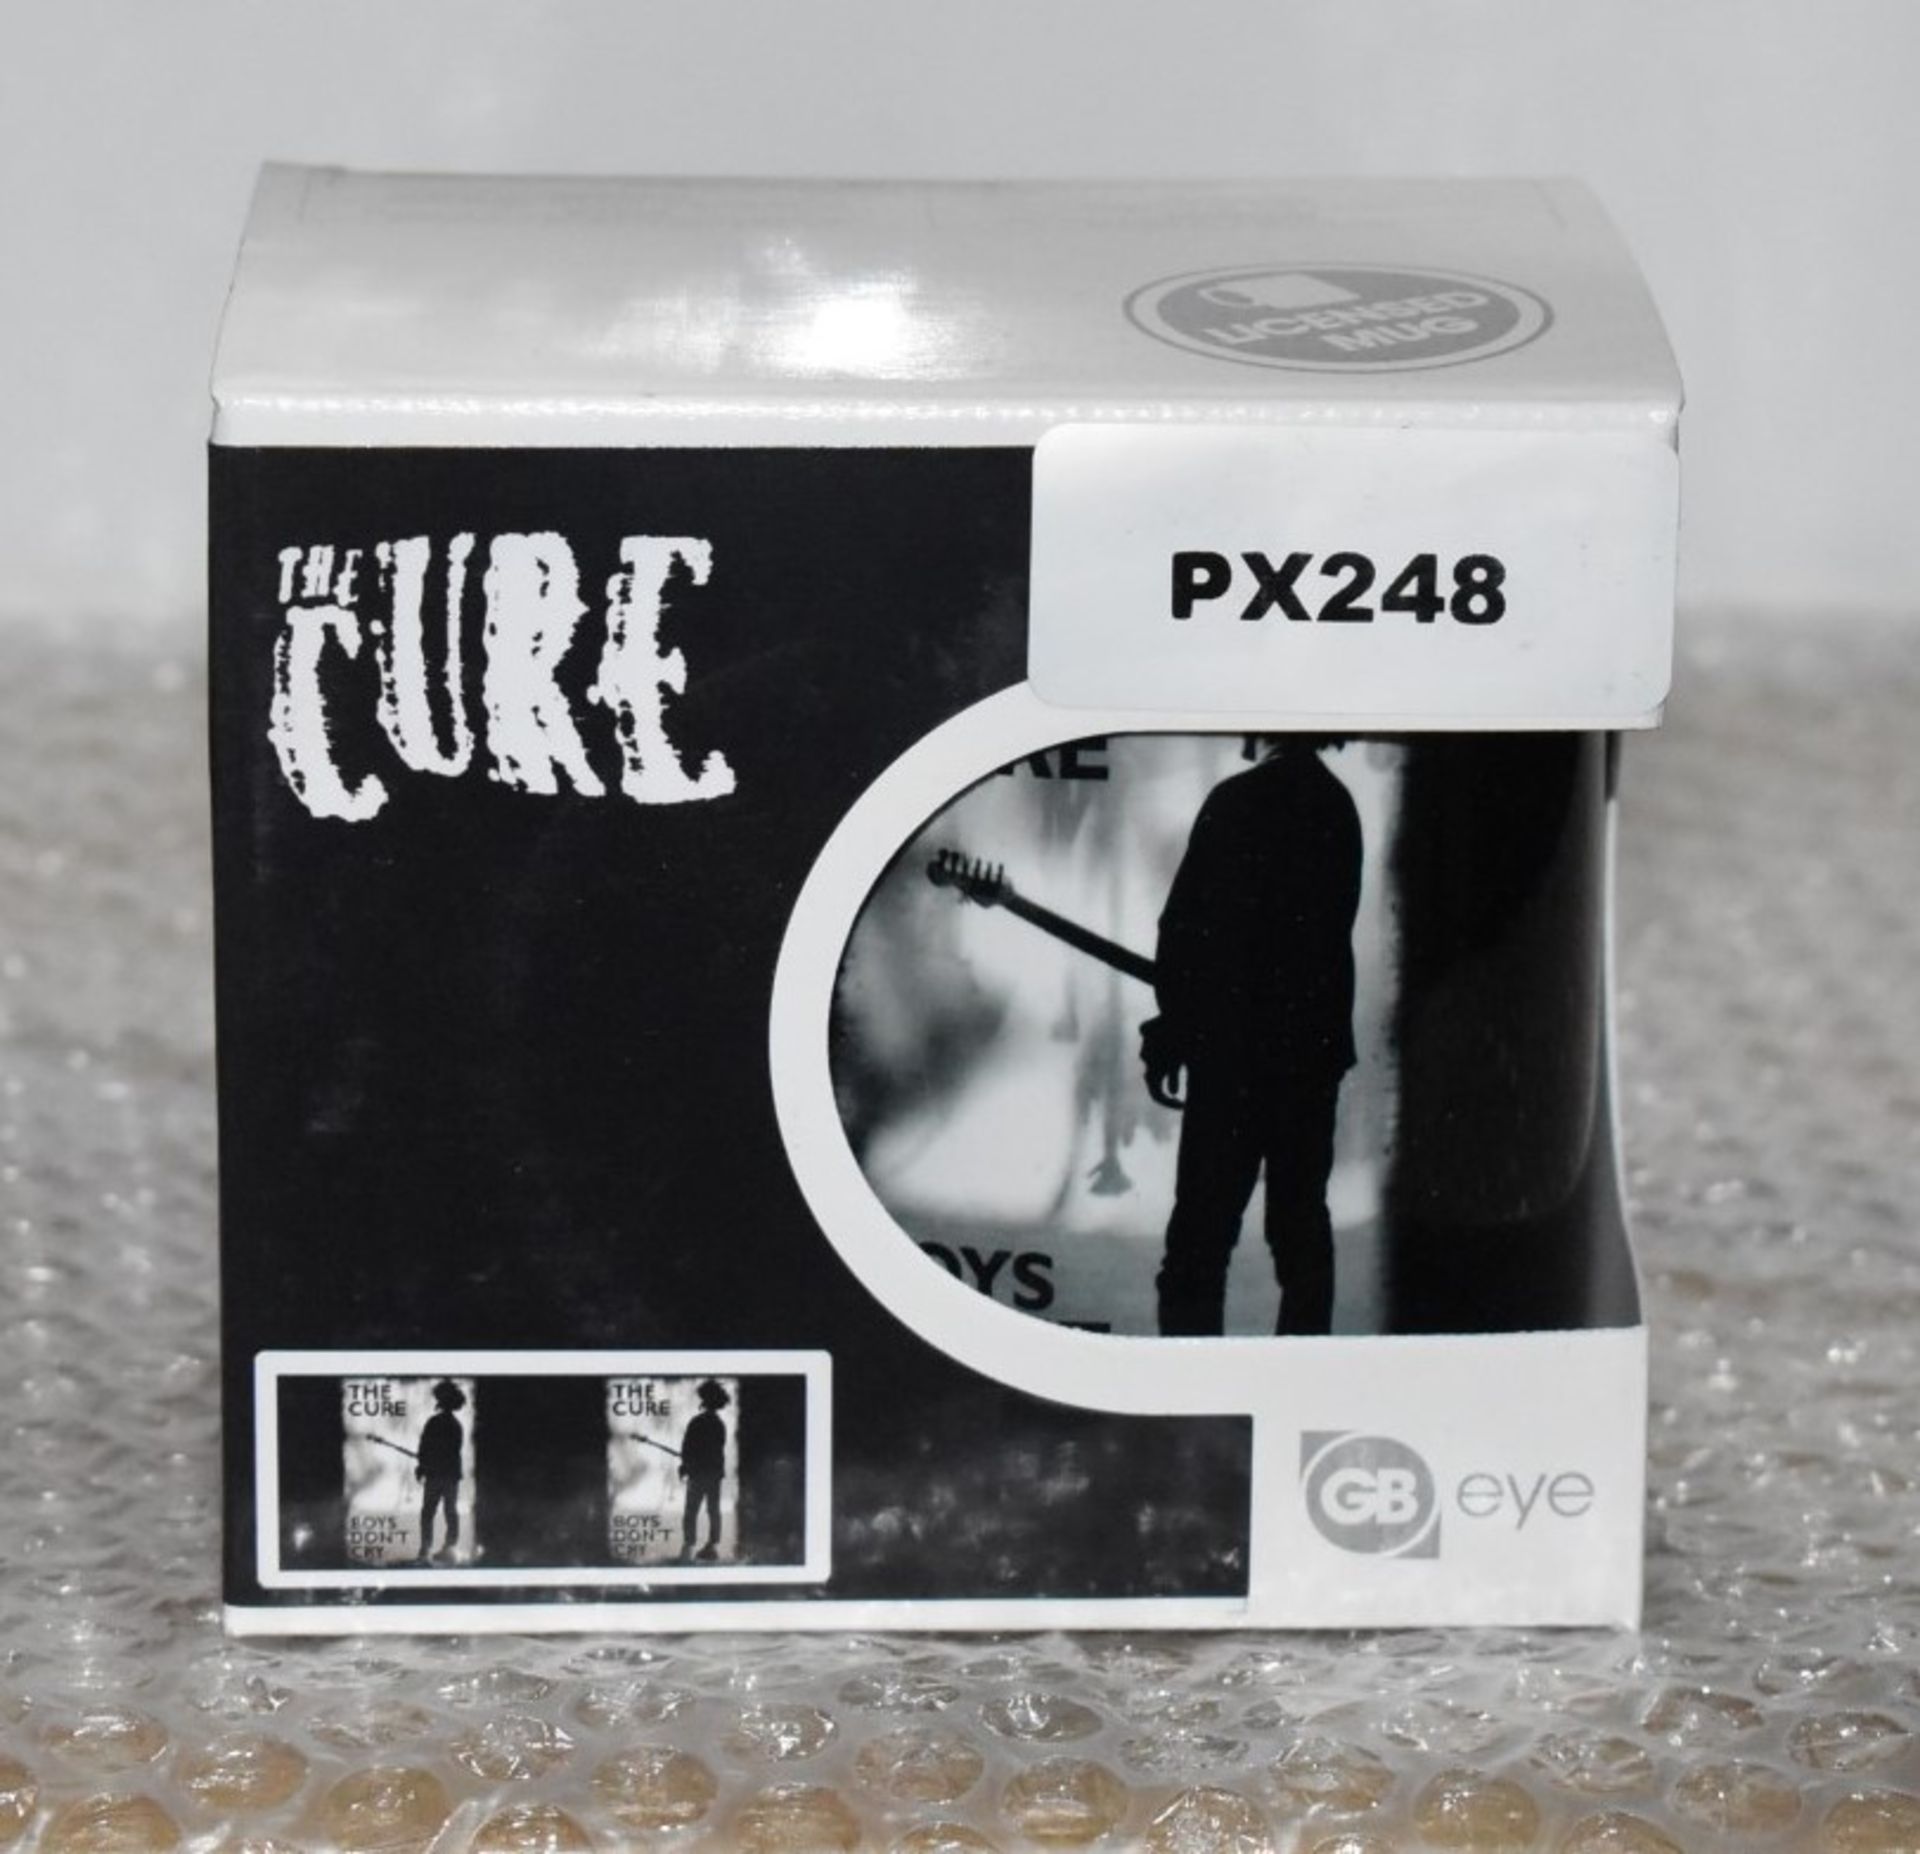 1 x Ceramic Drinking Mug - THE CURE - Officially Licensed Merchandise - New & Boxed - Ref: PX248